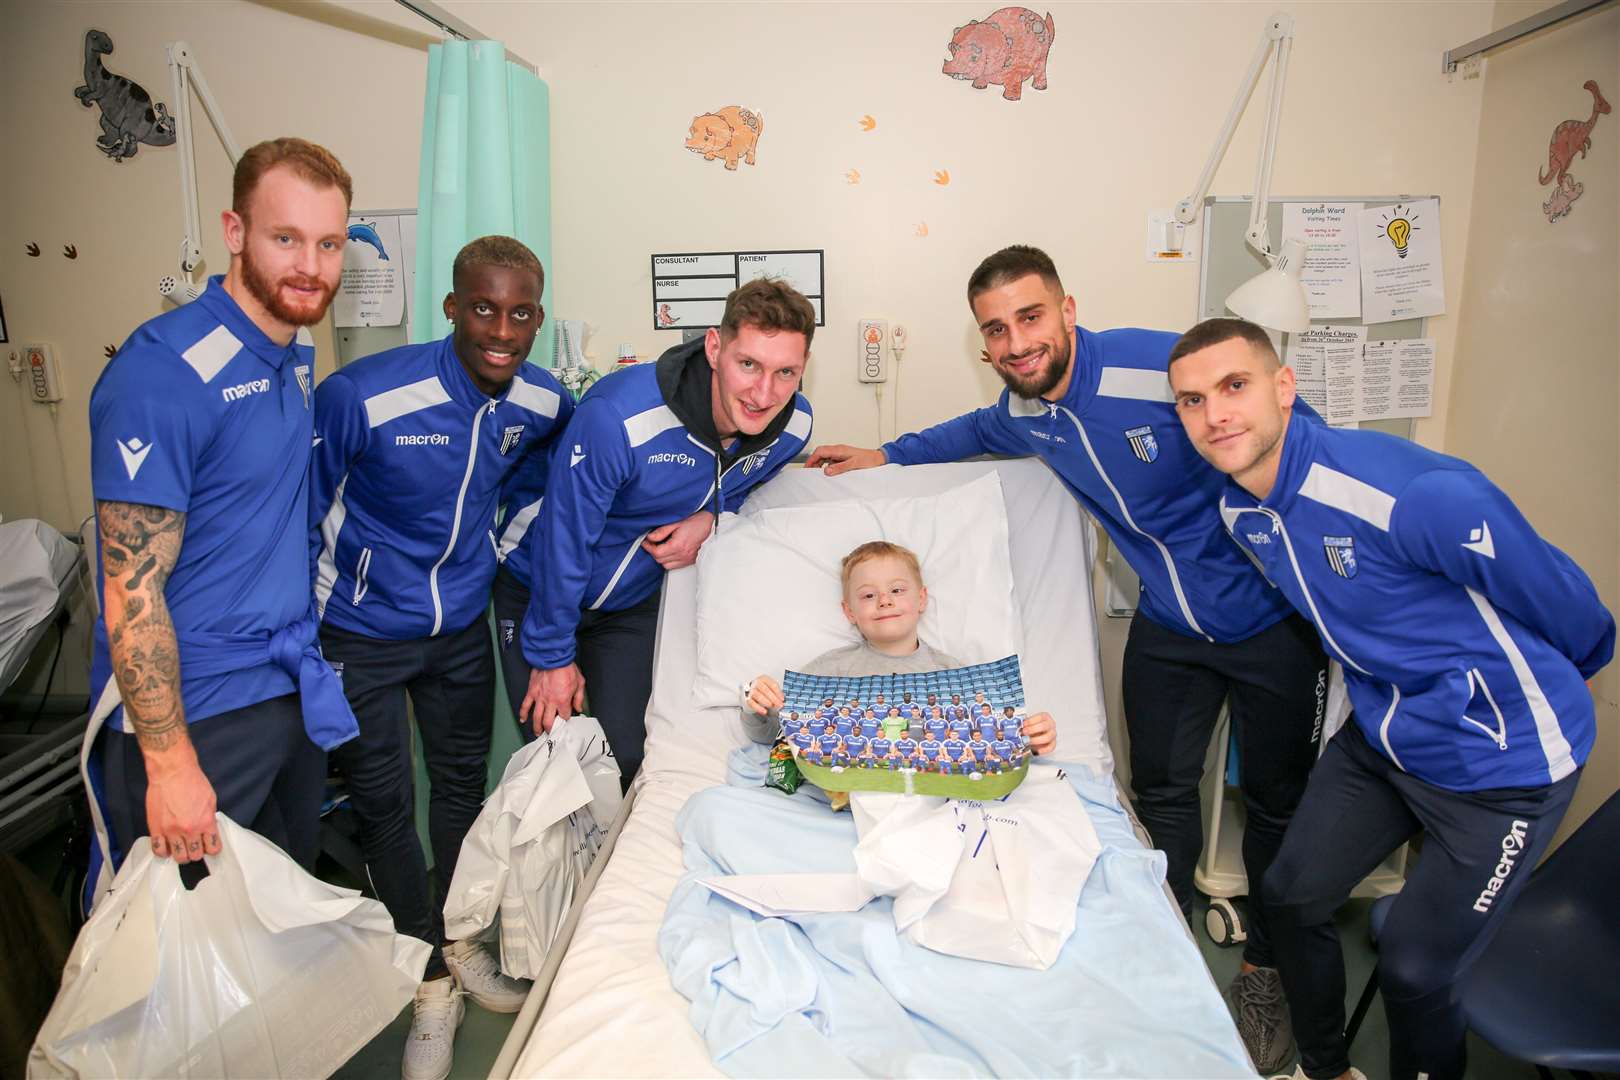 Stuart O'Keefe helped spread a bit of festive cheer at Medway Maritime Hospital during the team's visit to the children's Dolphin Ward. Pictured with seven-year-old Jack Fordham.